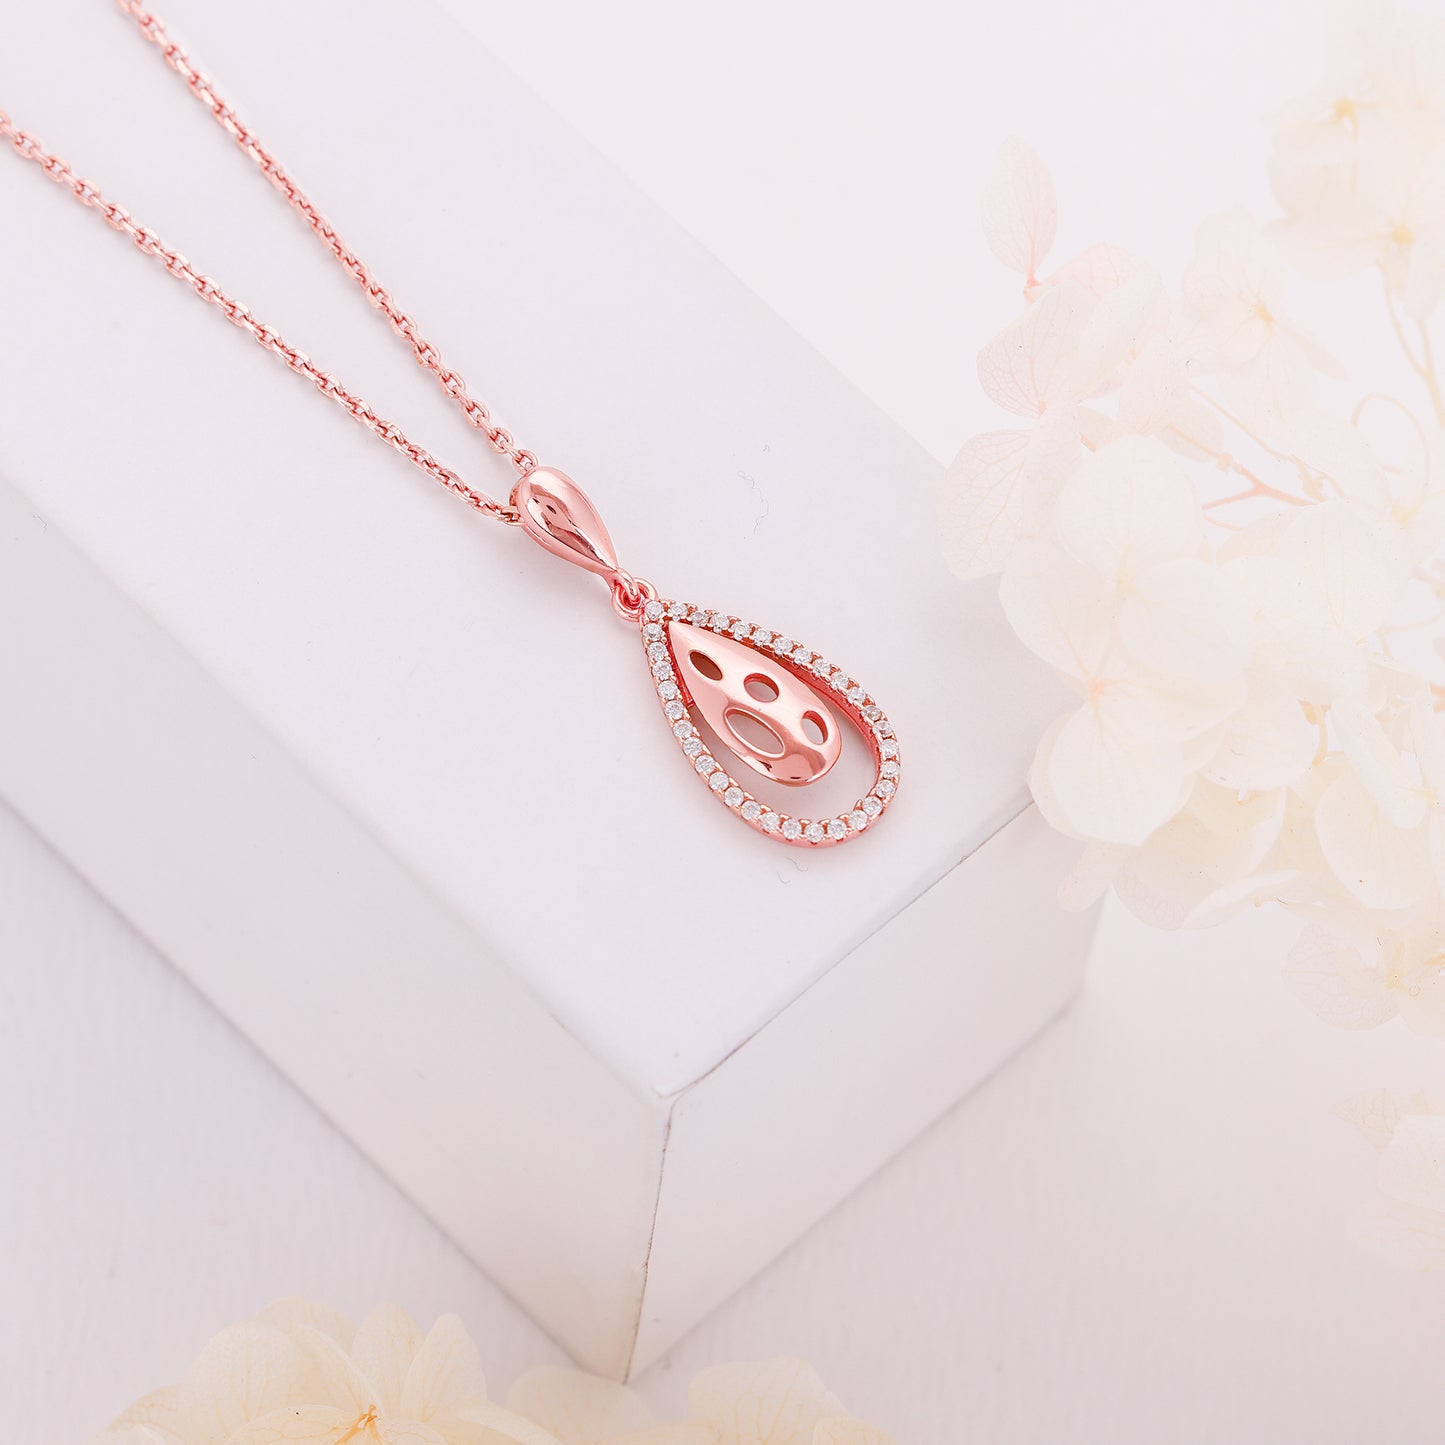 Rose Gold Intricate Teardrop Pendant with Link Chain